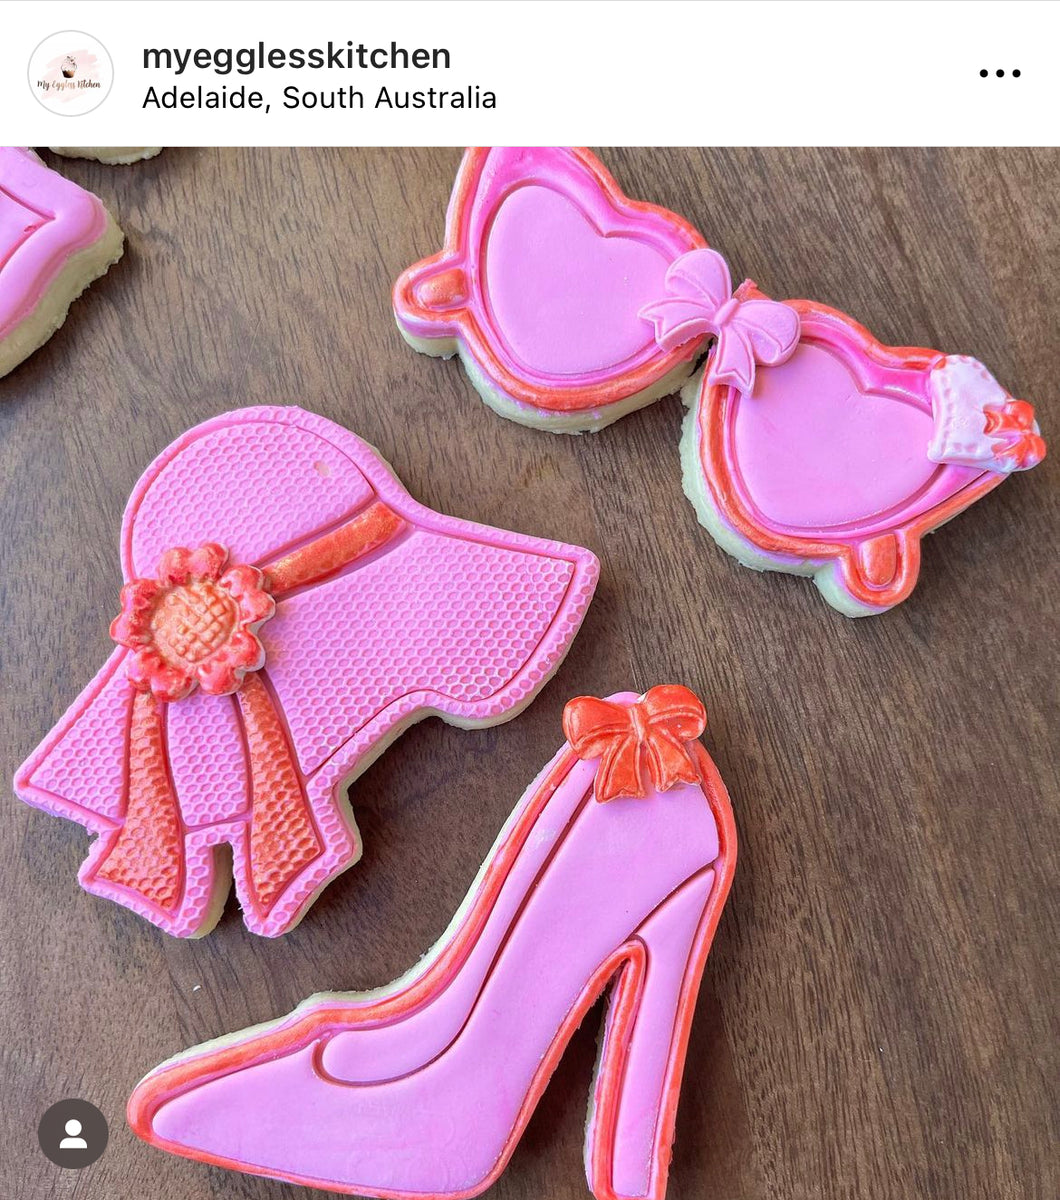 Highheel Hat sunglass cookie cutter lady party Barbie theme